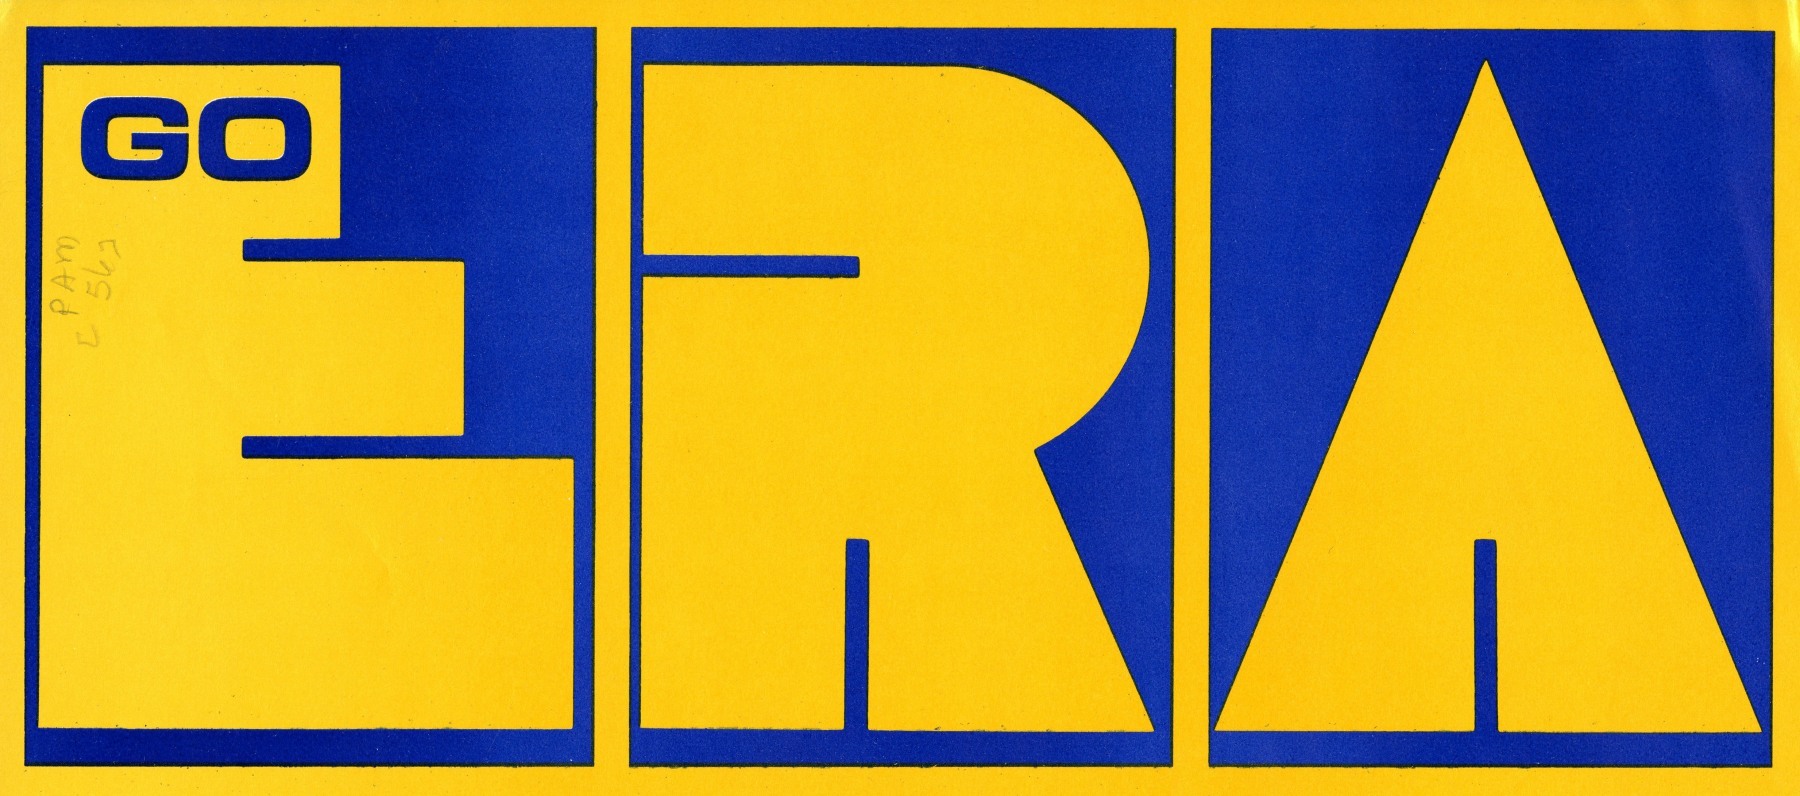 An ERA logo. "Go ERA" in bold yellow letters on a blue background